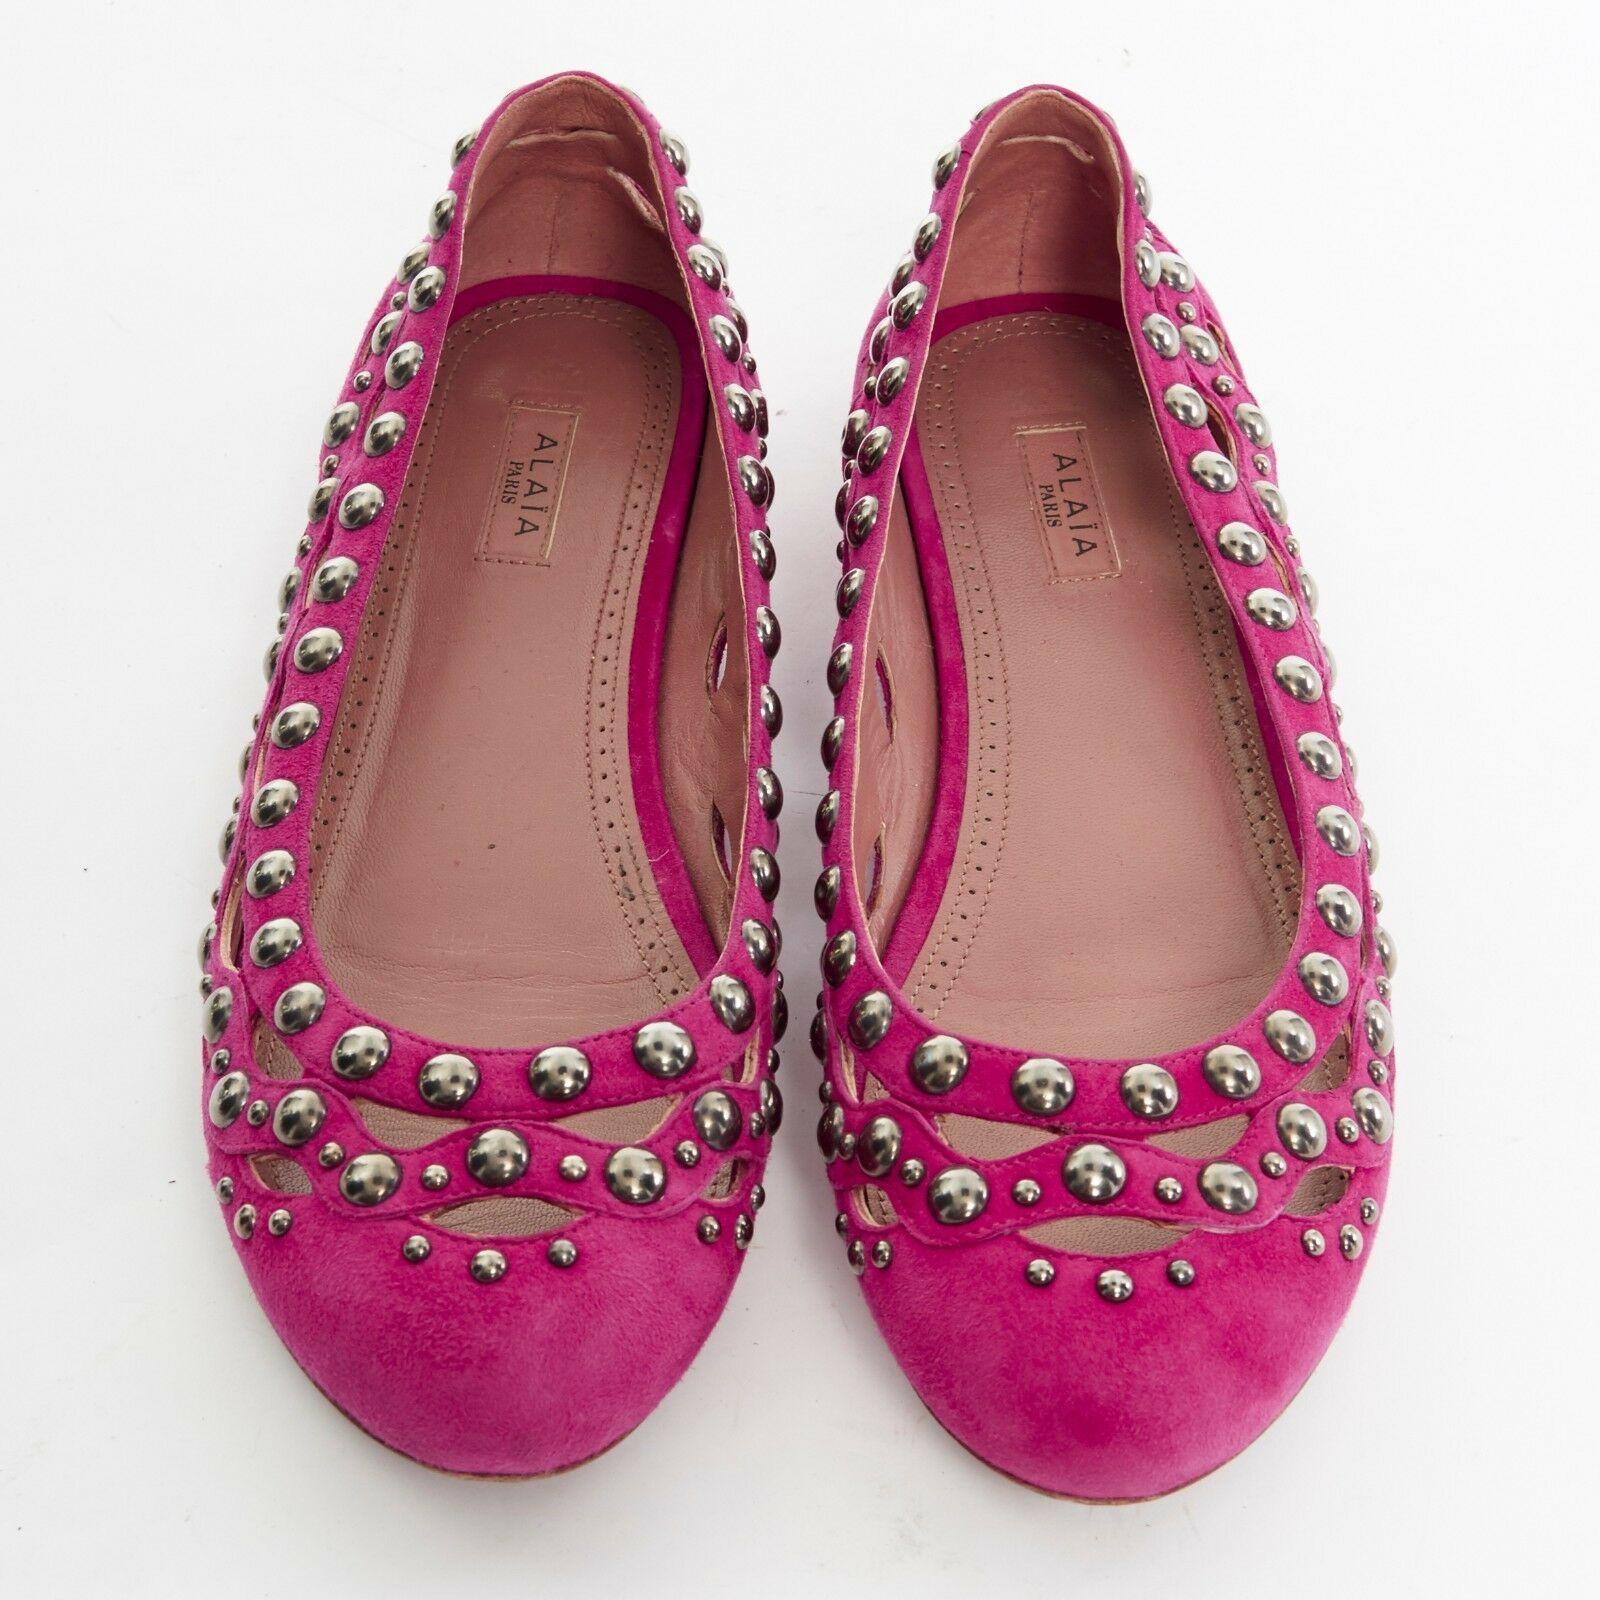 ALAIA pink suede silver studded cut out round toe ballerina flat shoes EU38 US8

AZZEDINE ALAIA
Pink suede leather upper. Silver-tone rounded stud embellishment upper. Wavy cut out detail. Round toe. Slip on. Leather lining. Ballerina flats. Made in